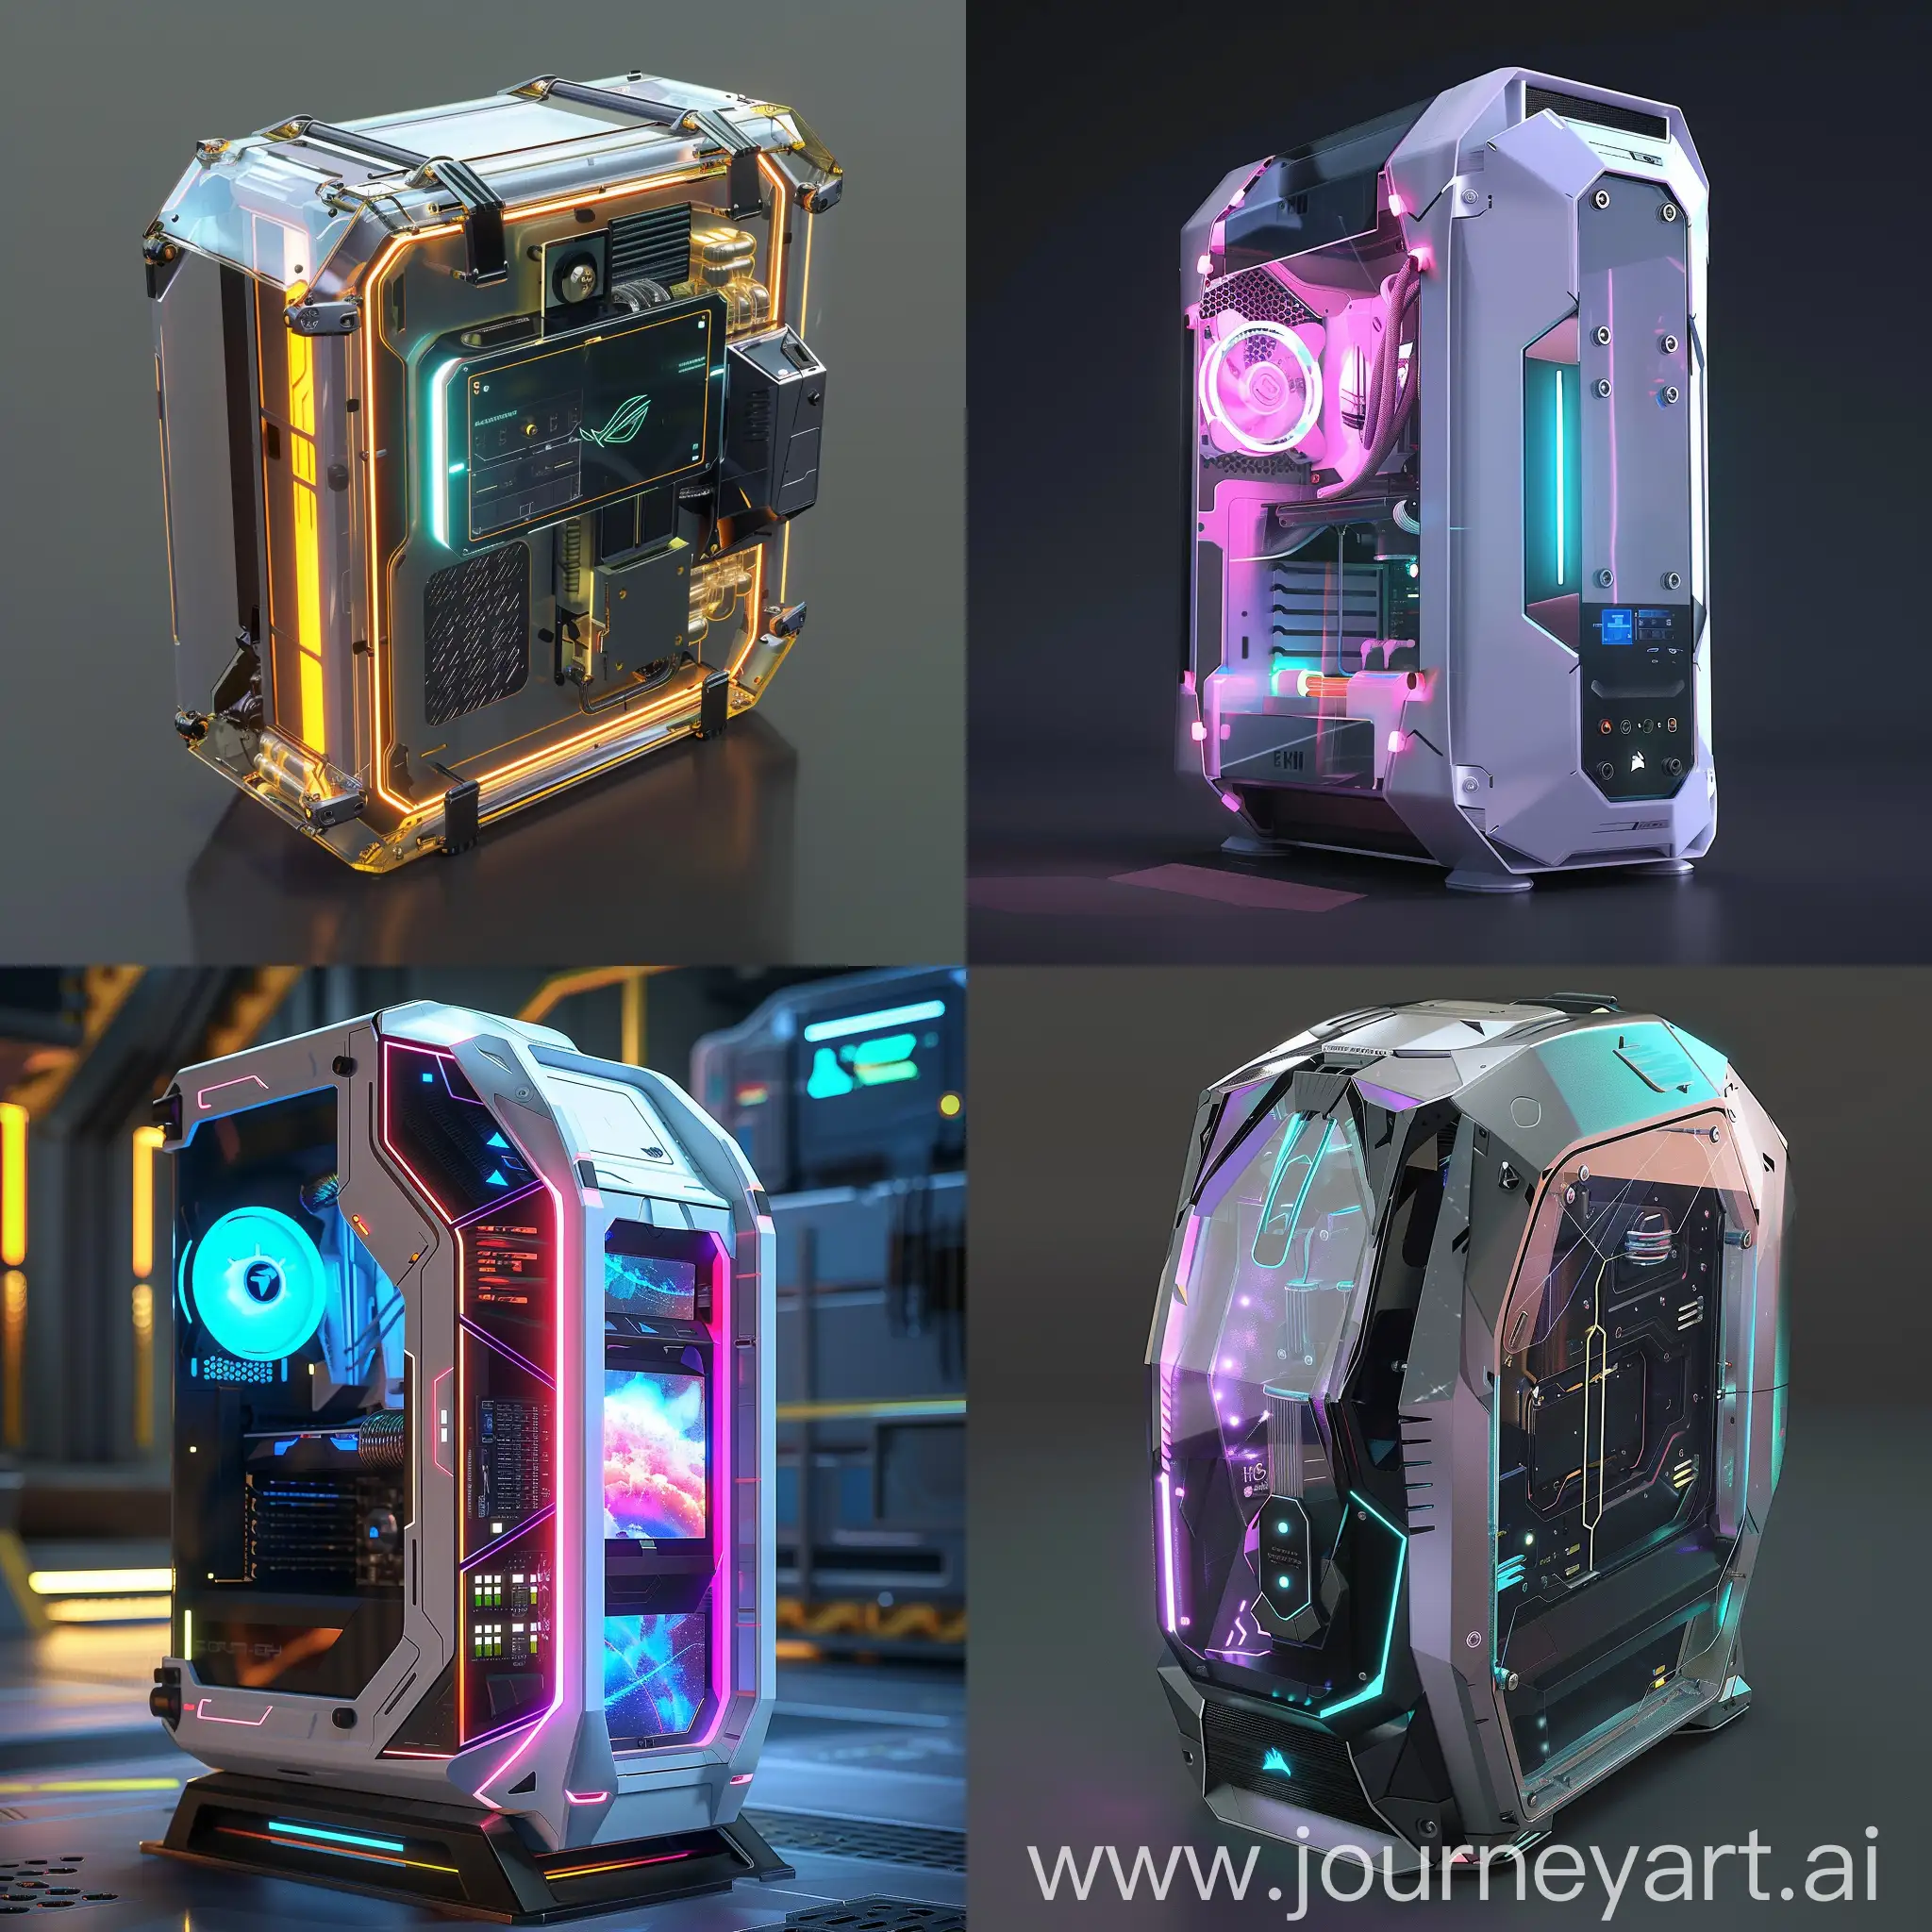 Advanced-SciFi-PC-Case-with-Transparent-Panels-and-Integrated-Lighting